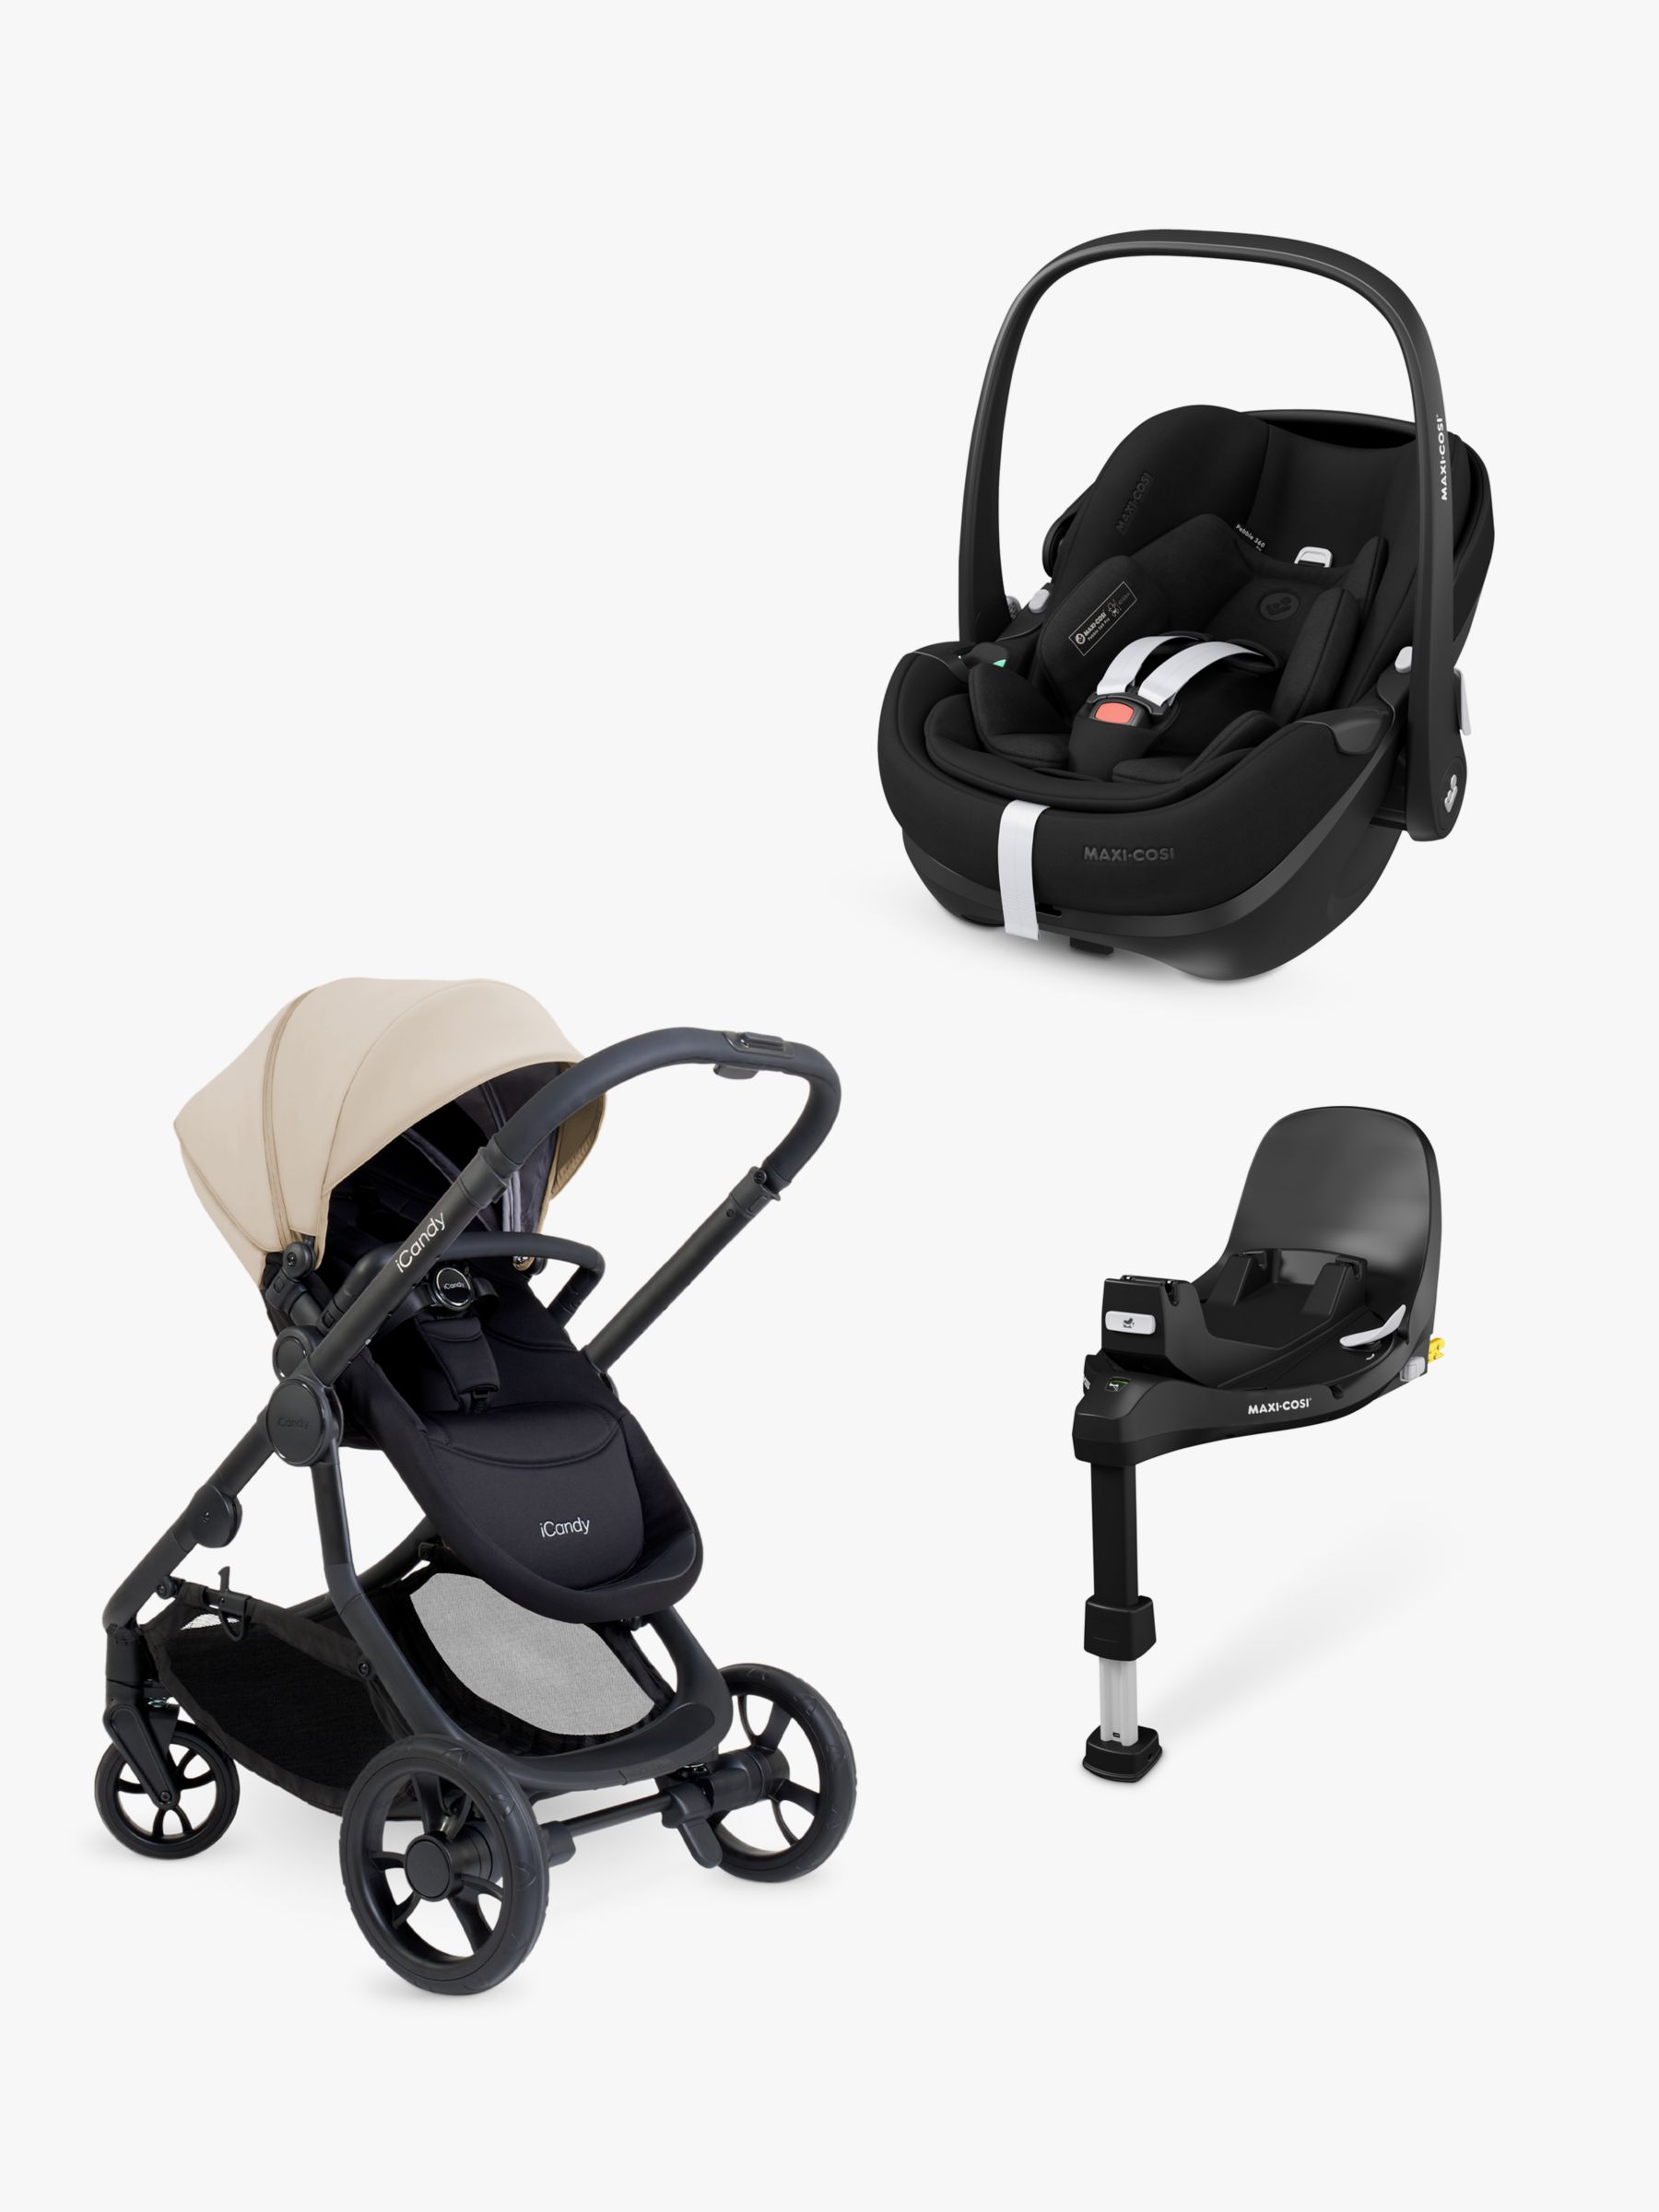 iCandy 4 Pushchair with Maxi-Cosi Pebble 360 Pro i-Size Car Seat and FamilyFix 360 Pro Base Bundle, Latte/Essential